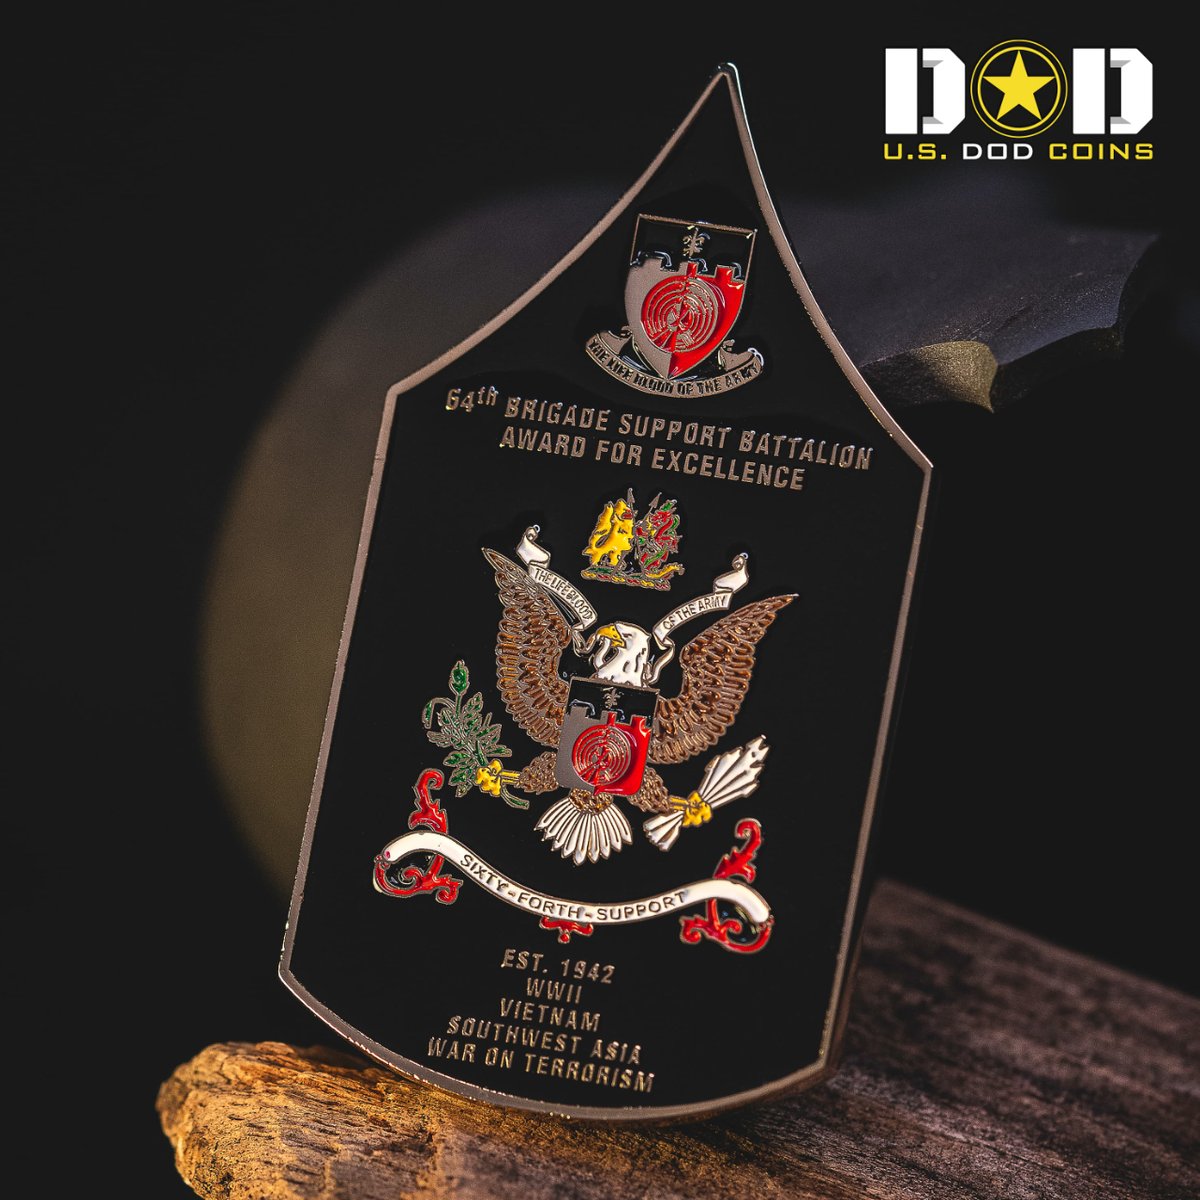 Be bold with your next challenge coin by going with a custom shape!
.
.
.
#usdodcoins #theflyingtigers #flyingtigers #challengecoin #challengecoins #coinscollectors #customcoin #militarycoins #coinmaker